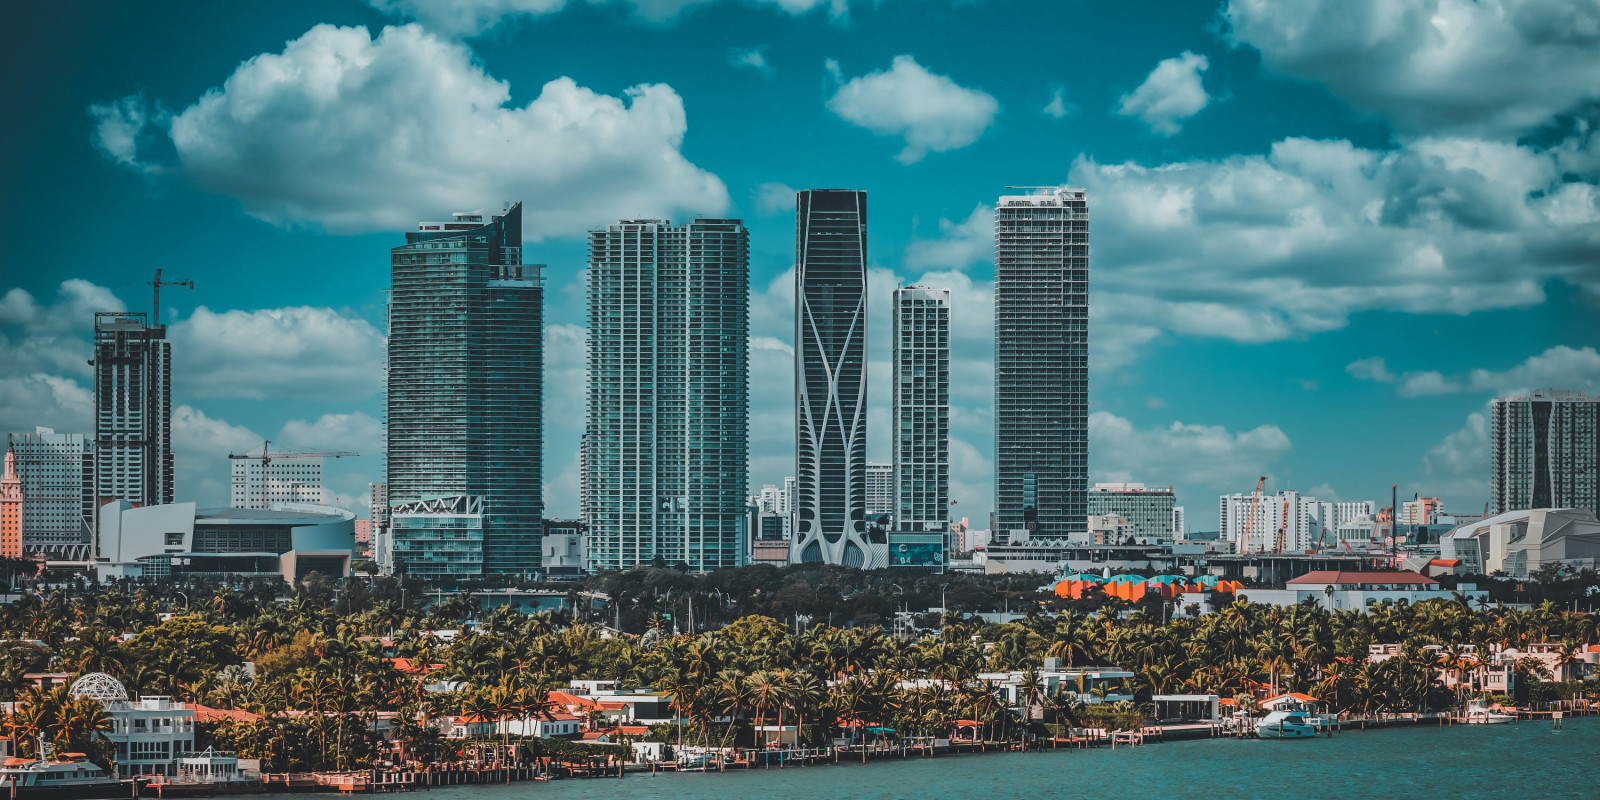 View of the city of Miami